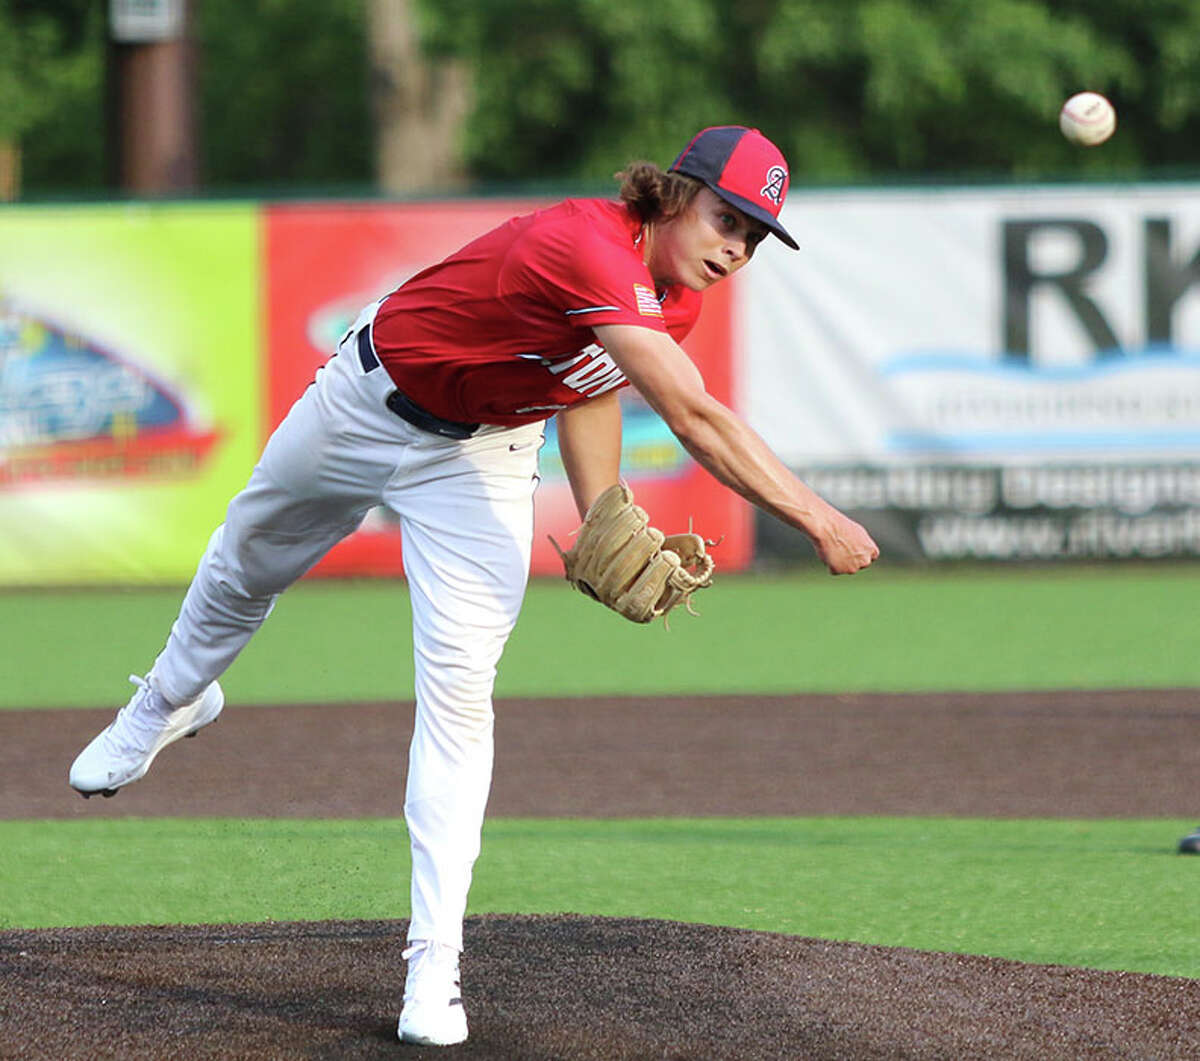 Alton Legion pitcher Nick Williams, a recent CM graduate, started and picked up the win against Maryland Heights on Saturday night at Hopkins Field in Alton.